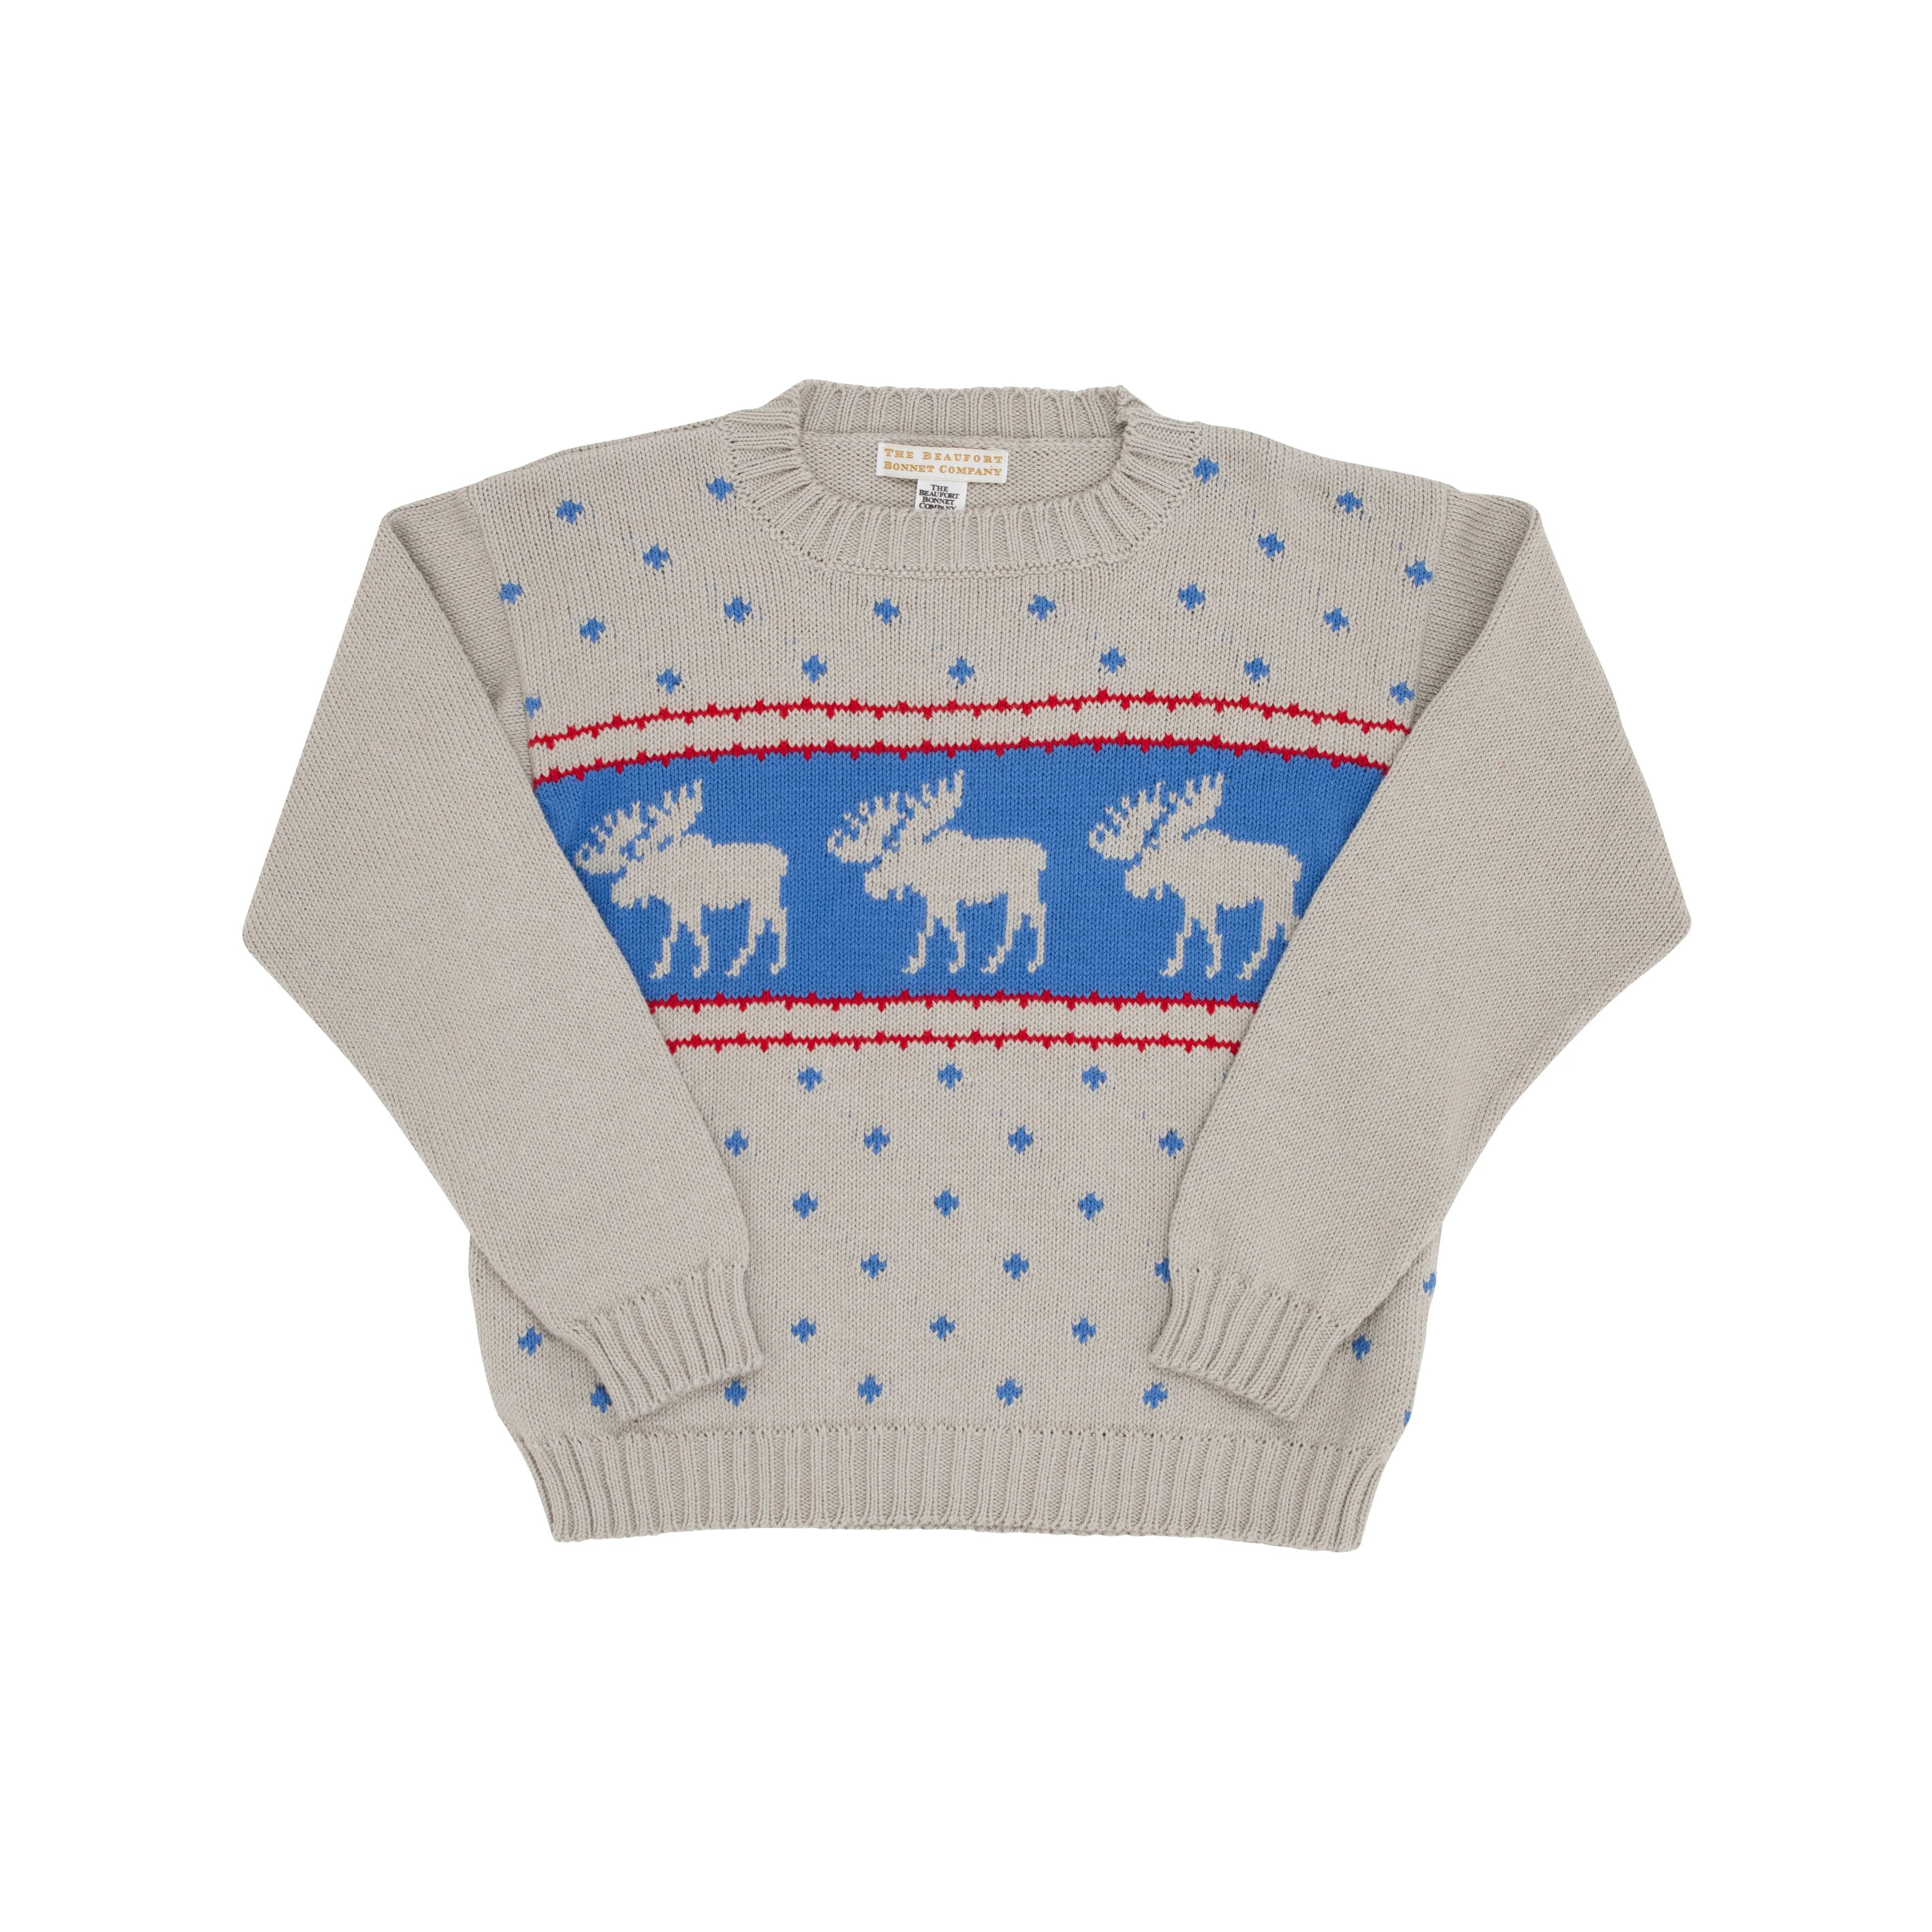 Isaac's Intarsia Sweater - Grantley Gray with Moose Intarsia | The Beaufort Bonnet Company